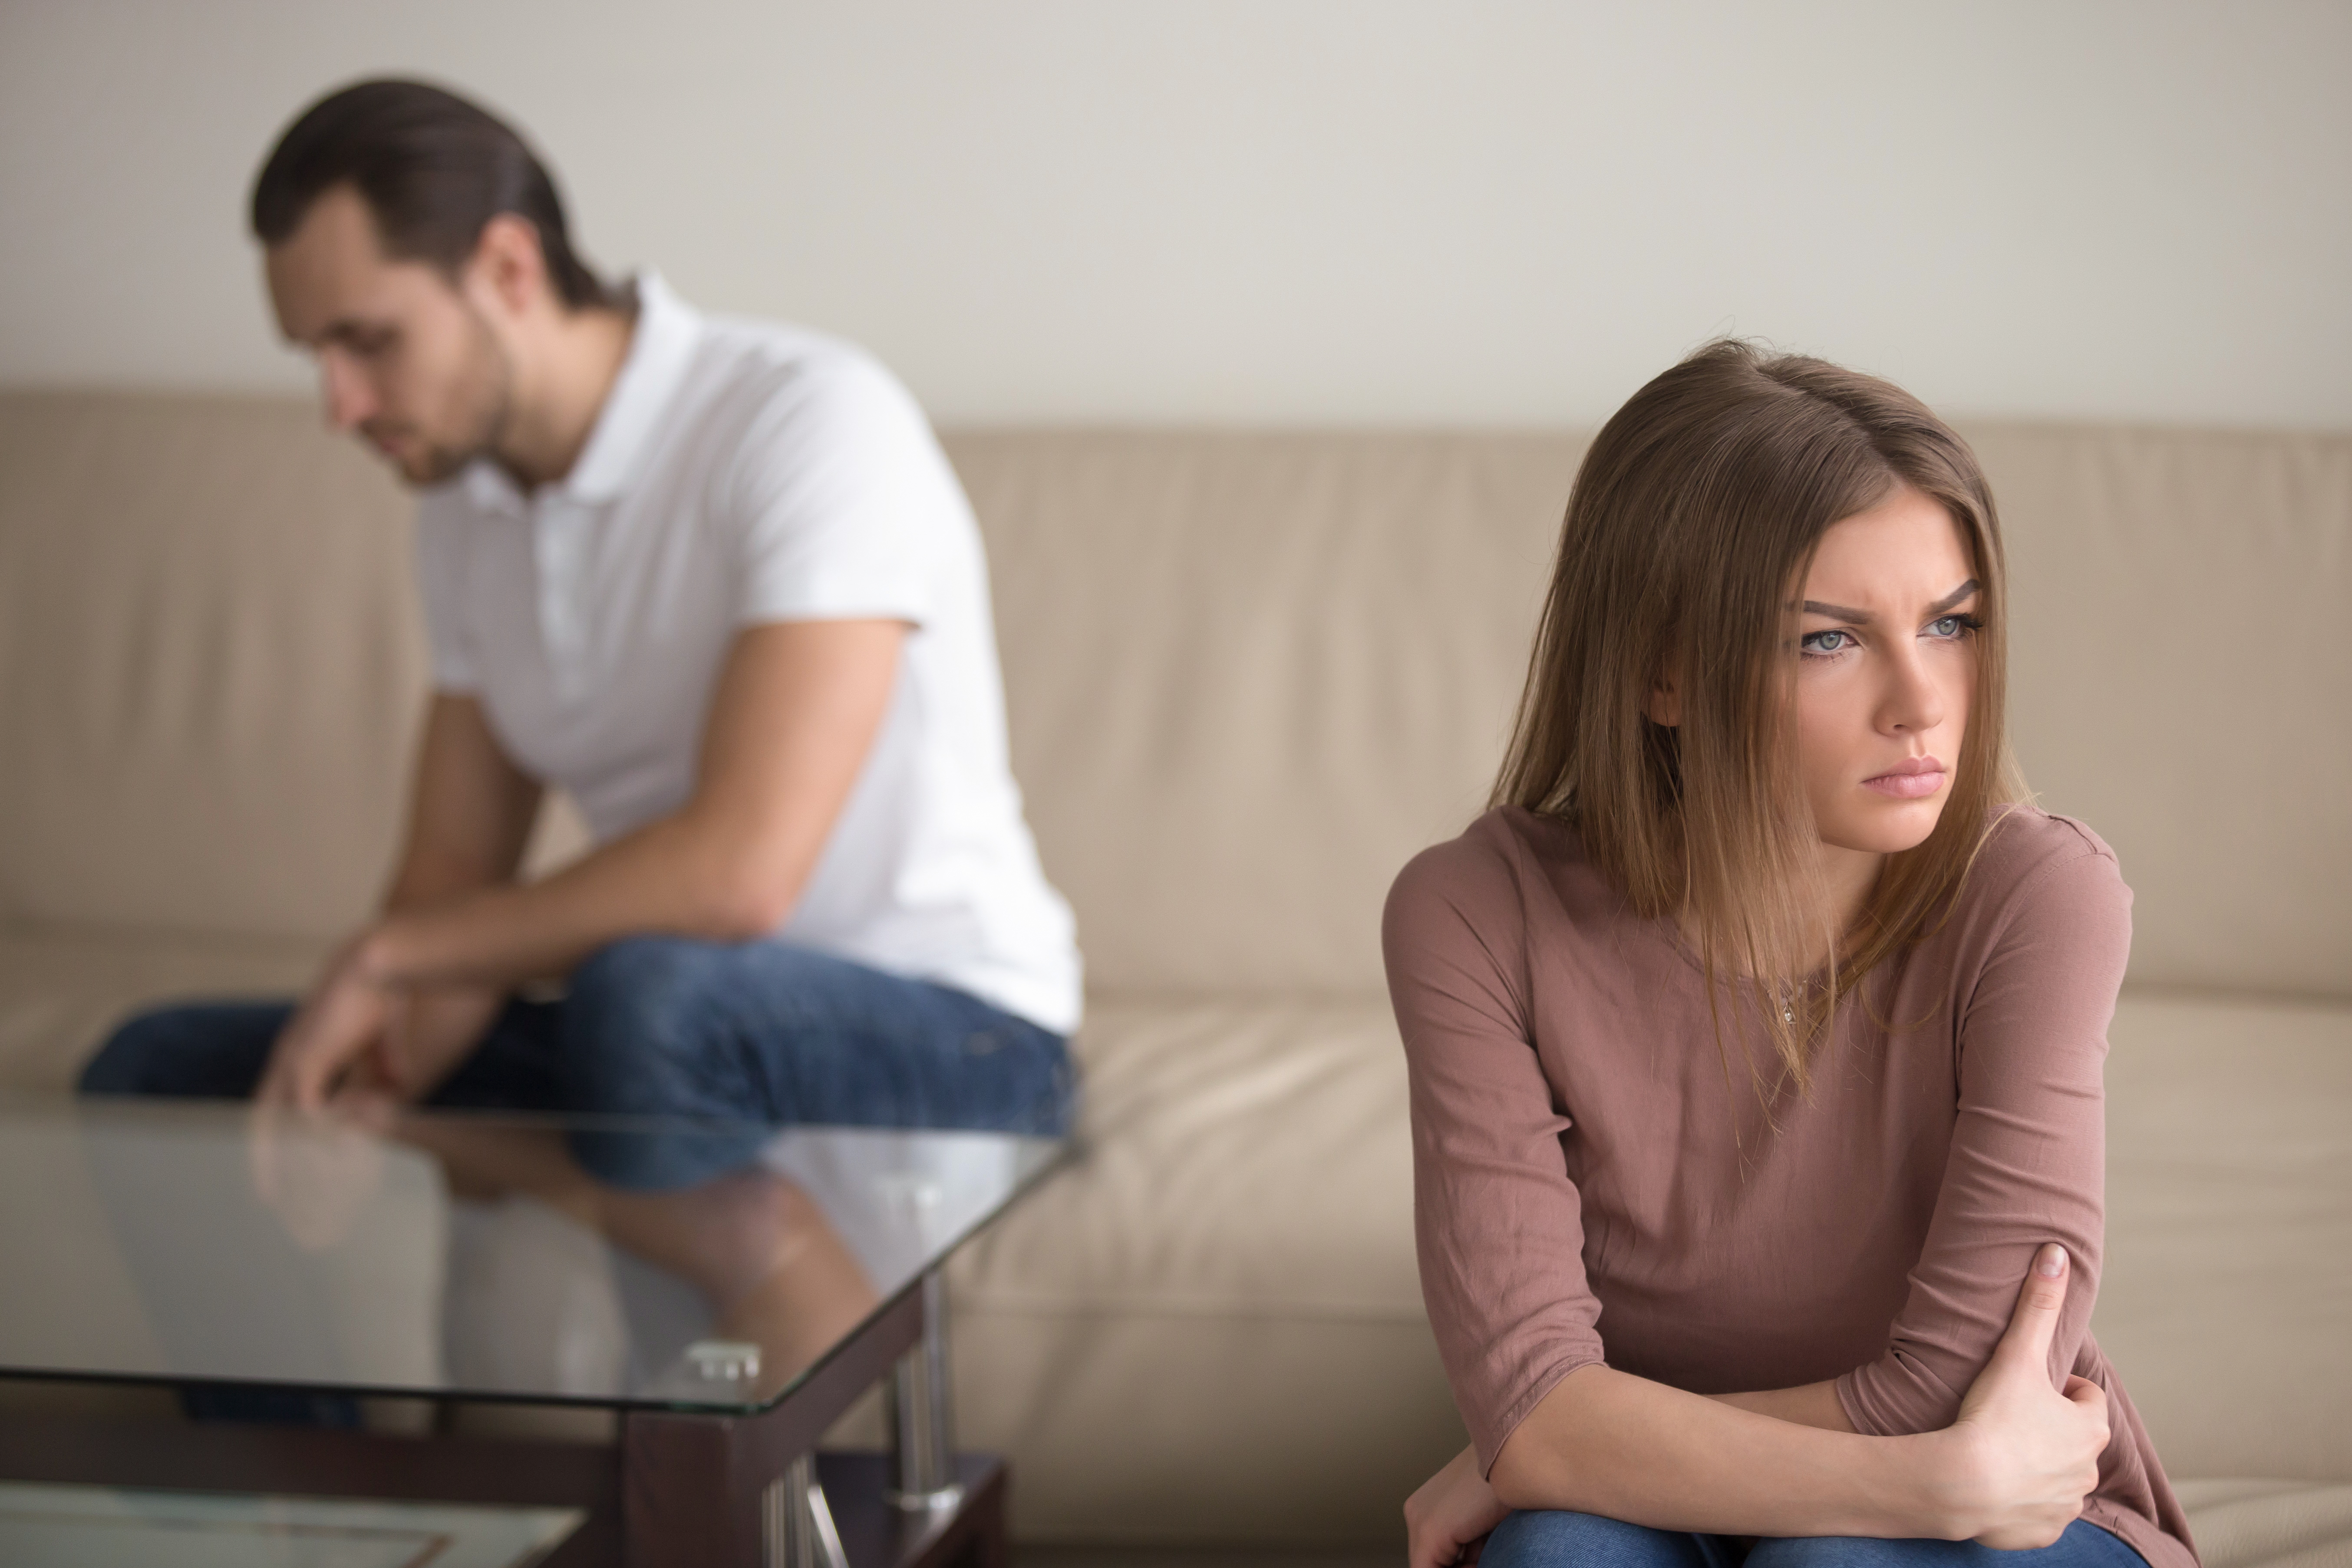 A couple sitting apart after an argument | Source: Shutterstock